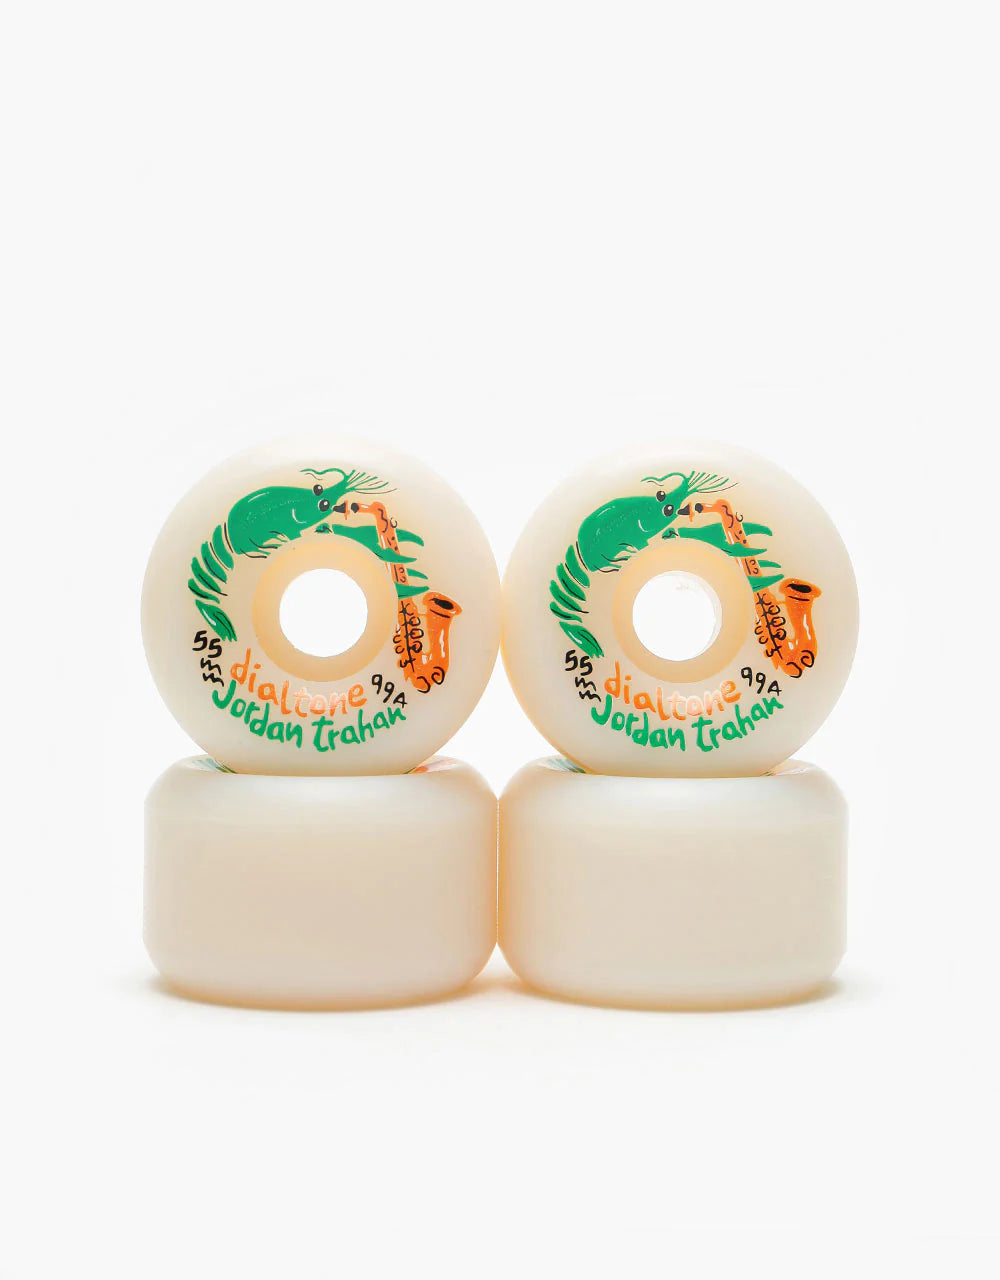 Dial Tone Wheels Trahan Zydeco Conical 55mm profile view